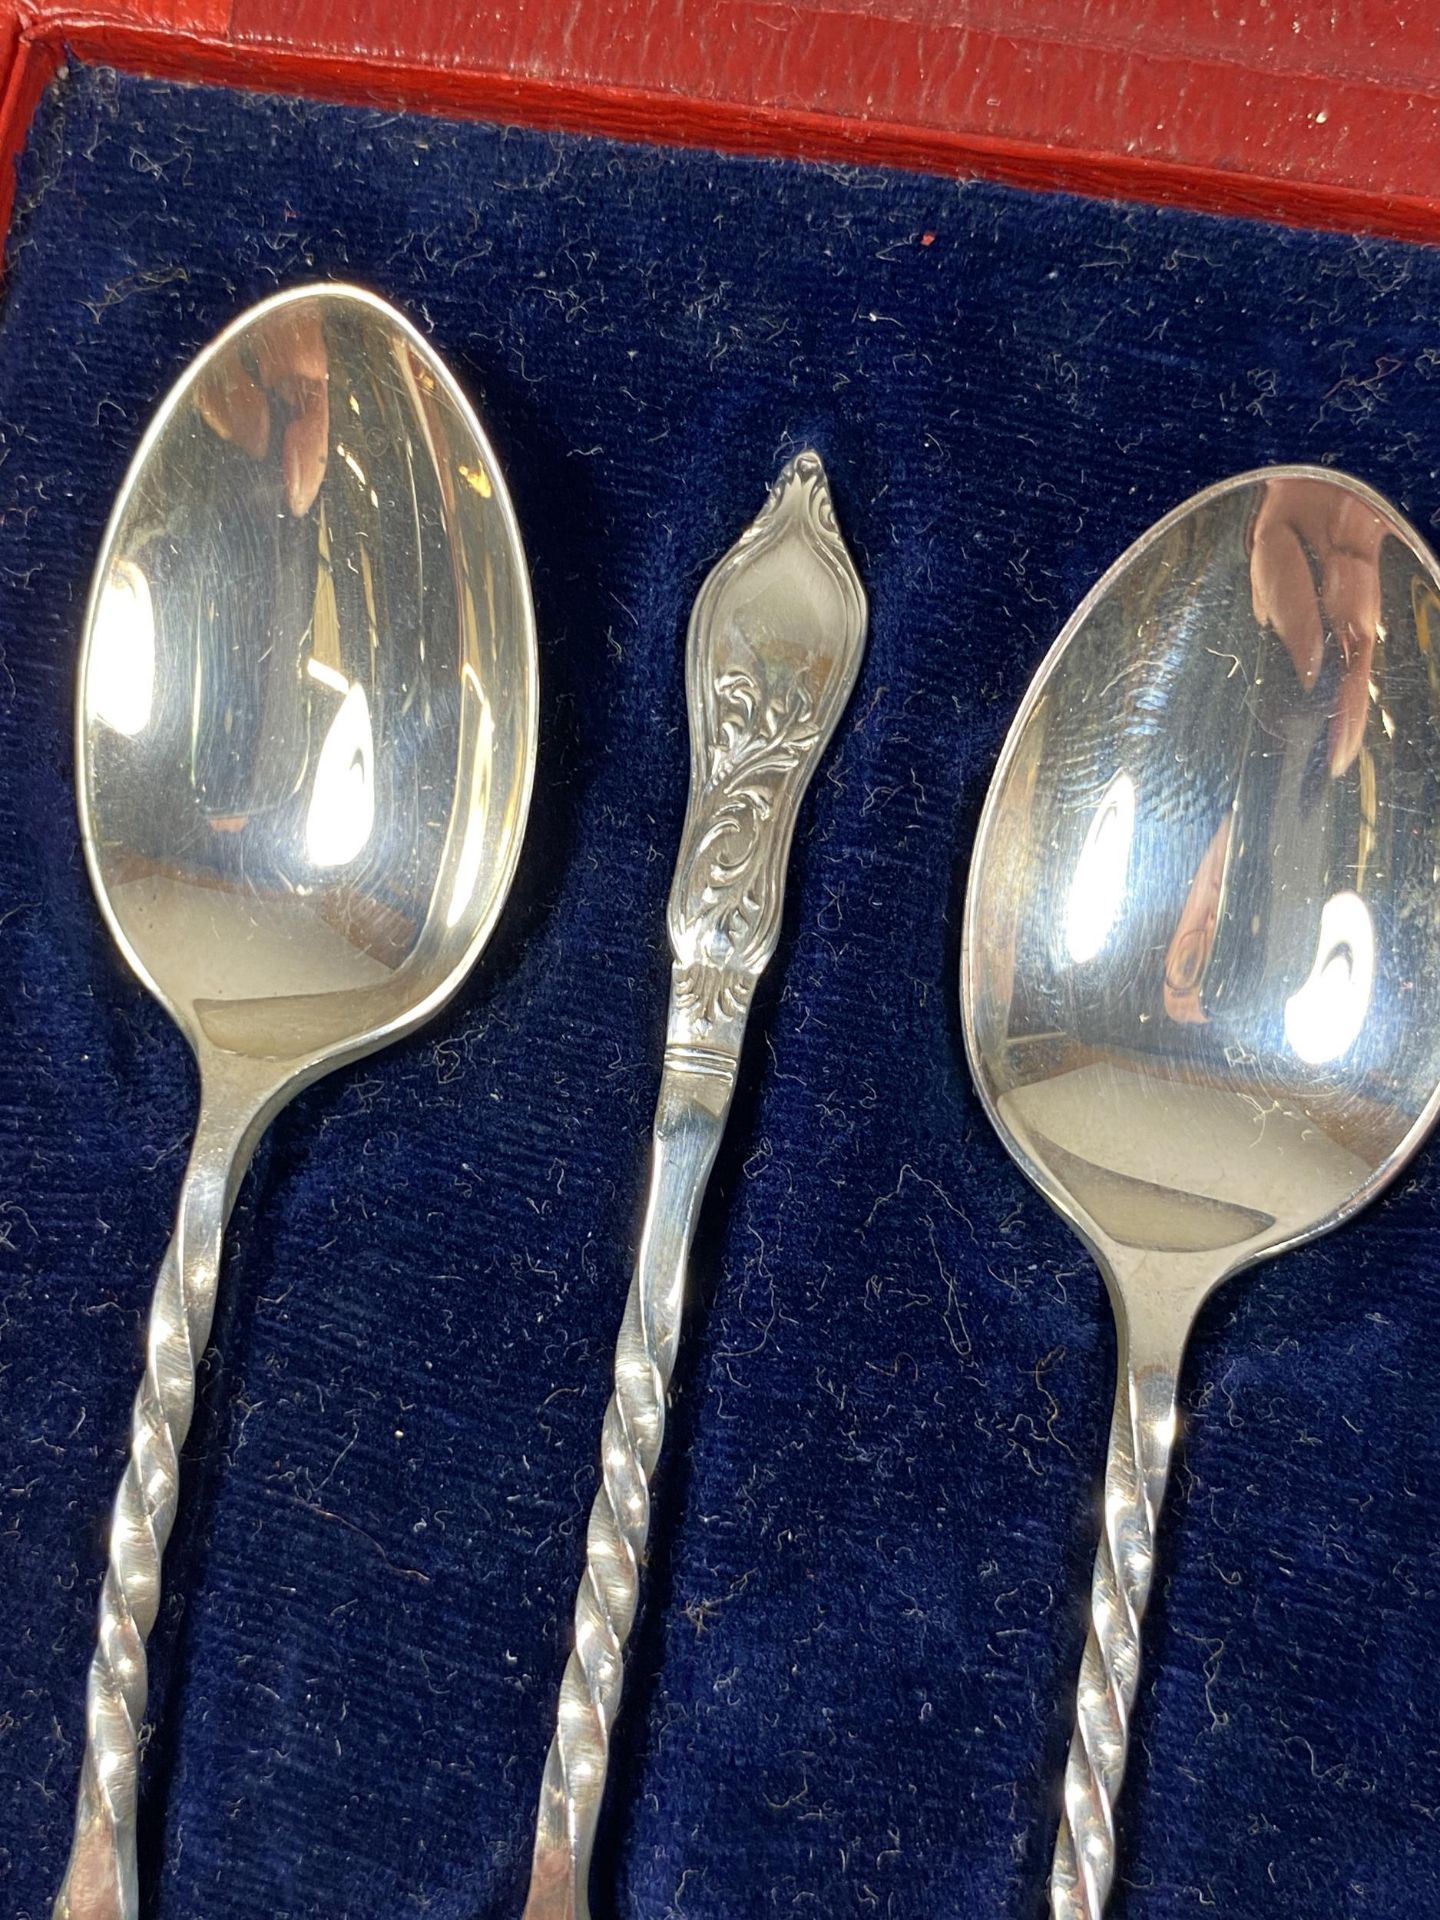 A CASED SET OF SIX SHEFFIELD HALLMARKED SILVER TEASPOONS - Image 3 of 4